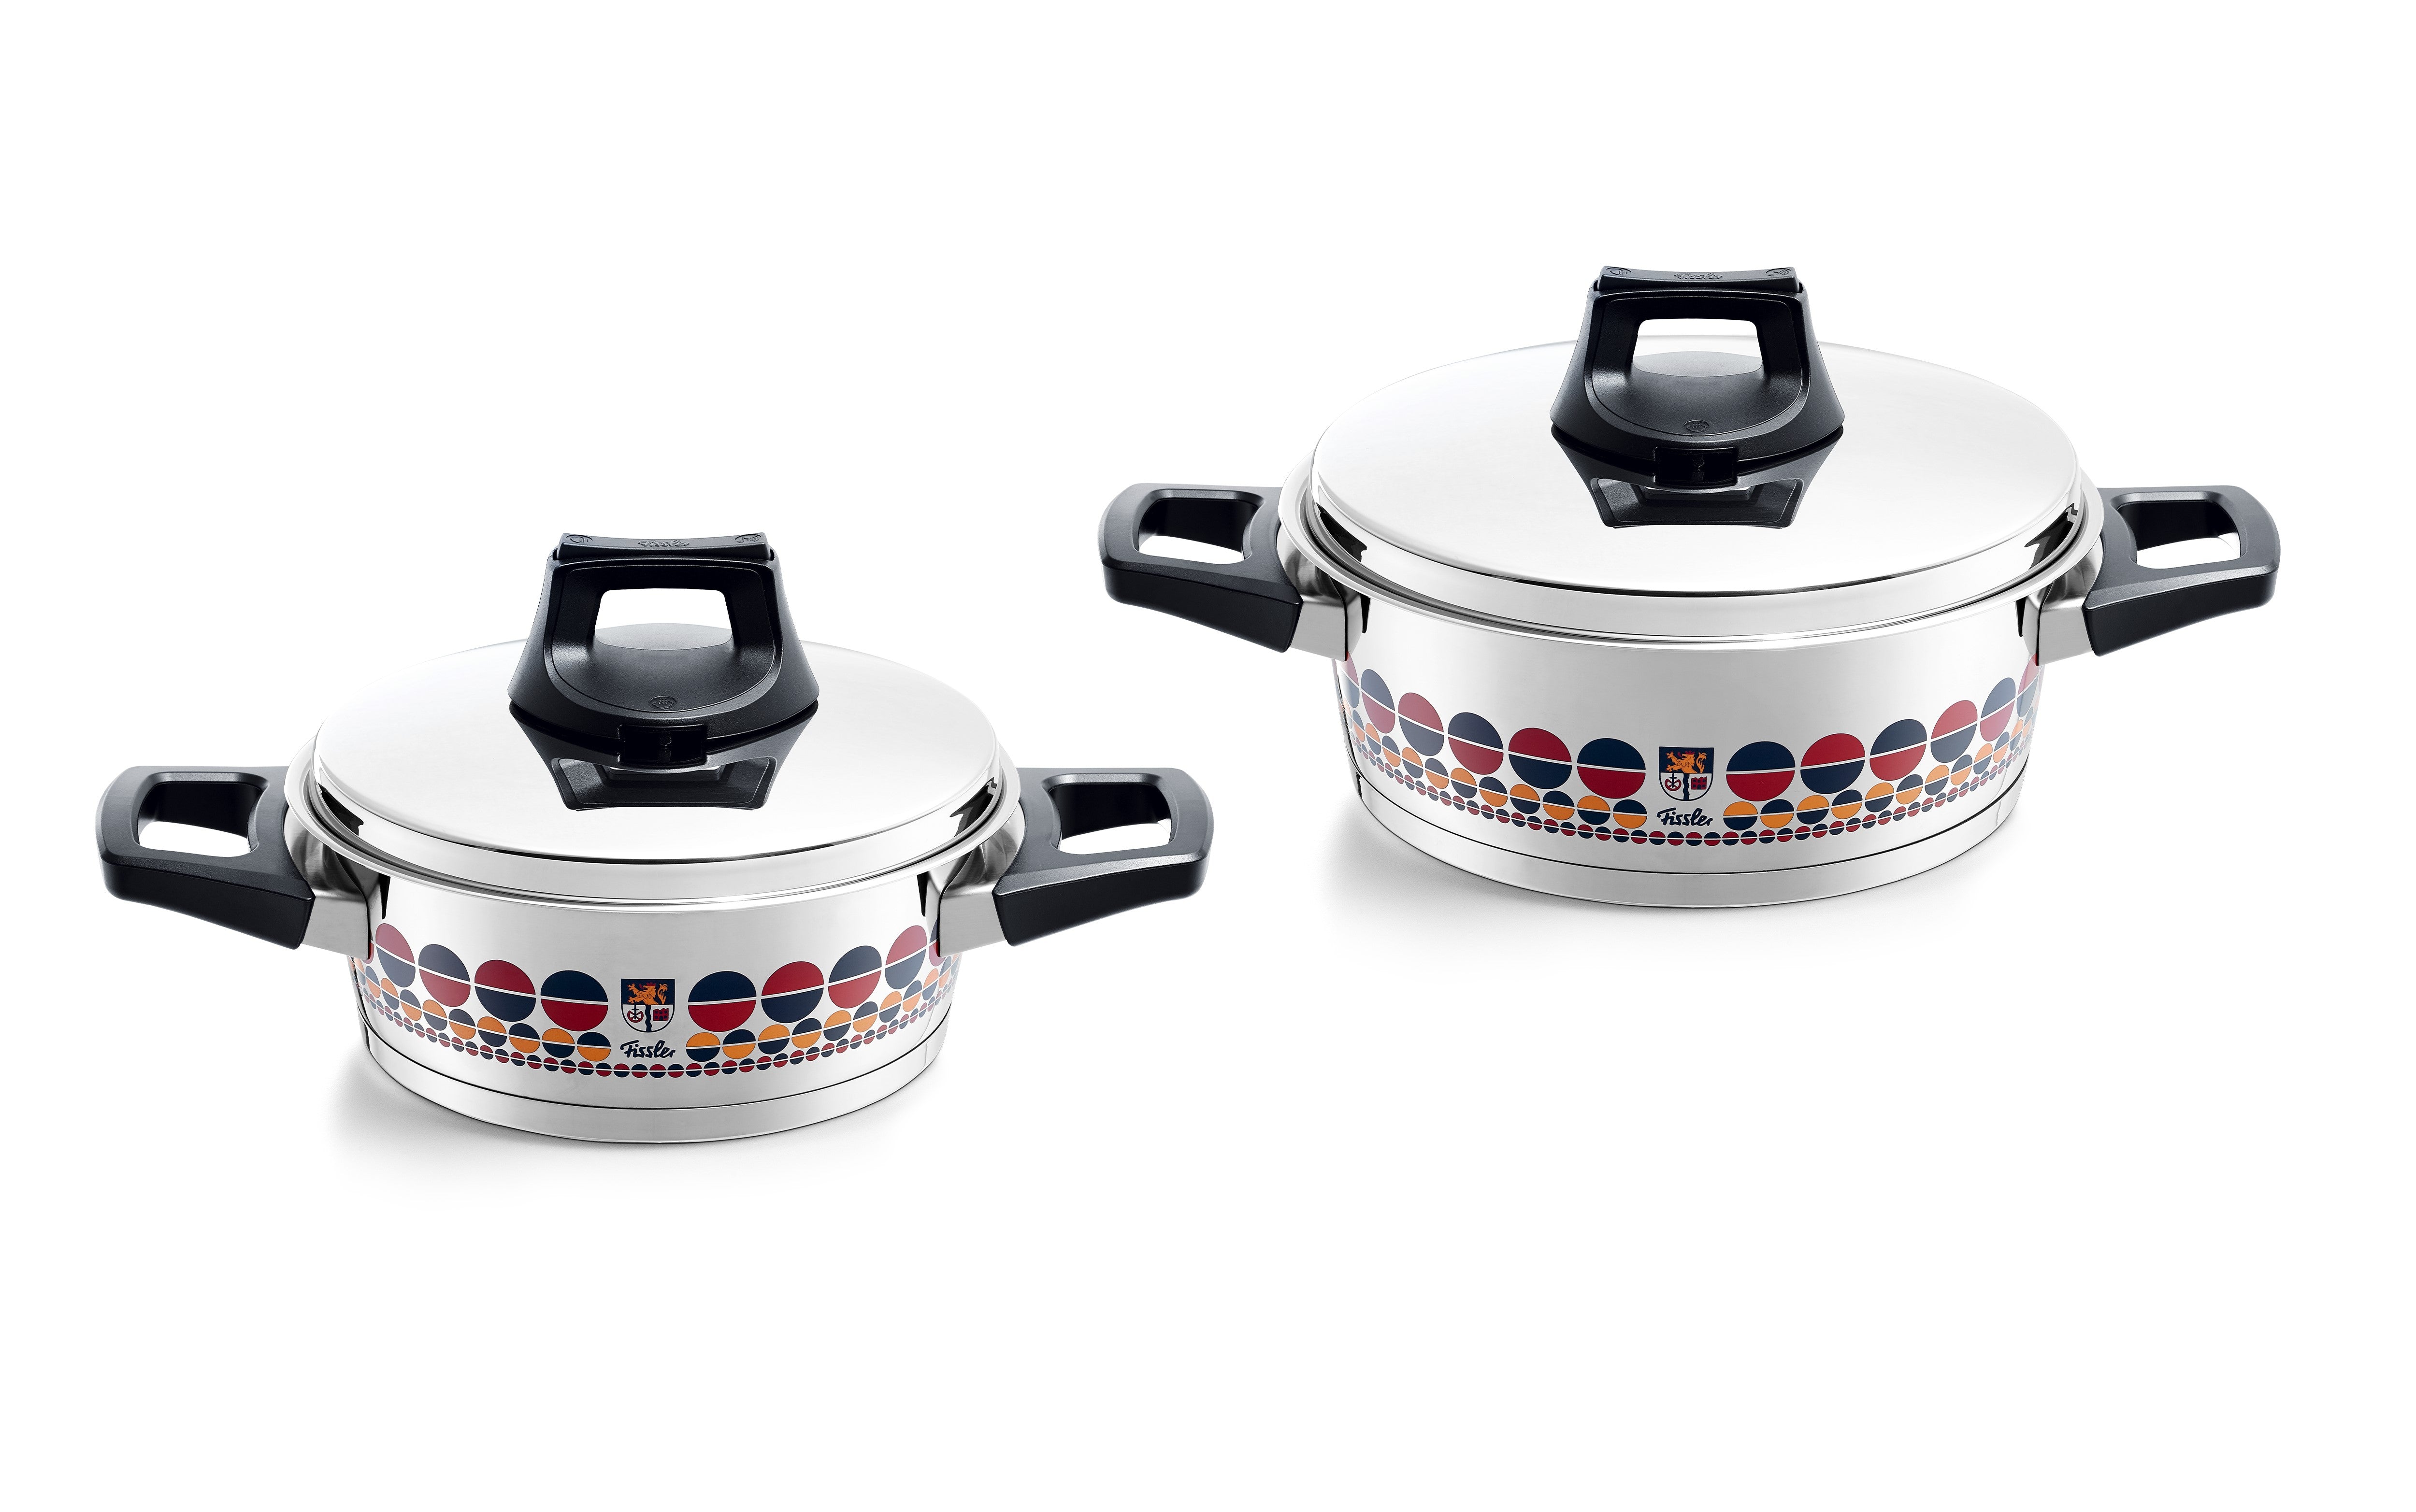 Buy high quality stainless steel cookware sets, Fissler®